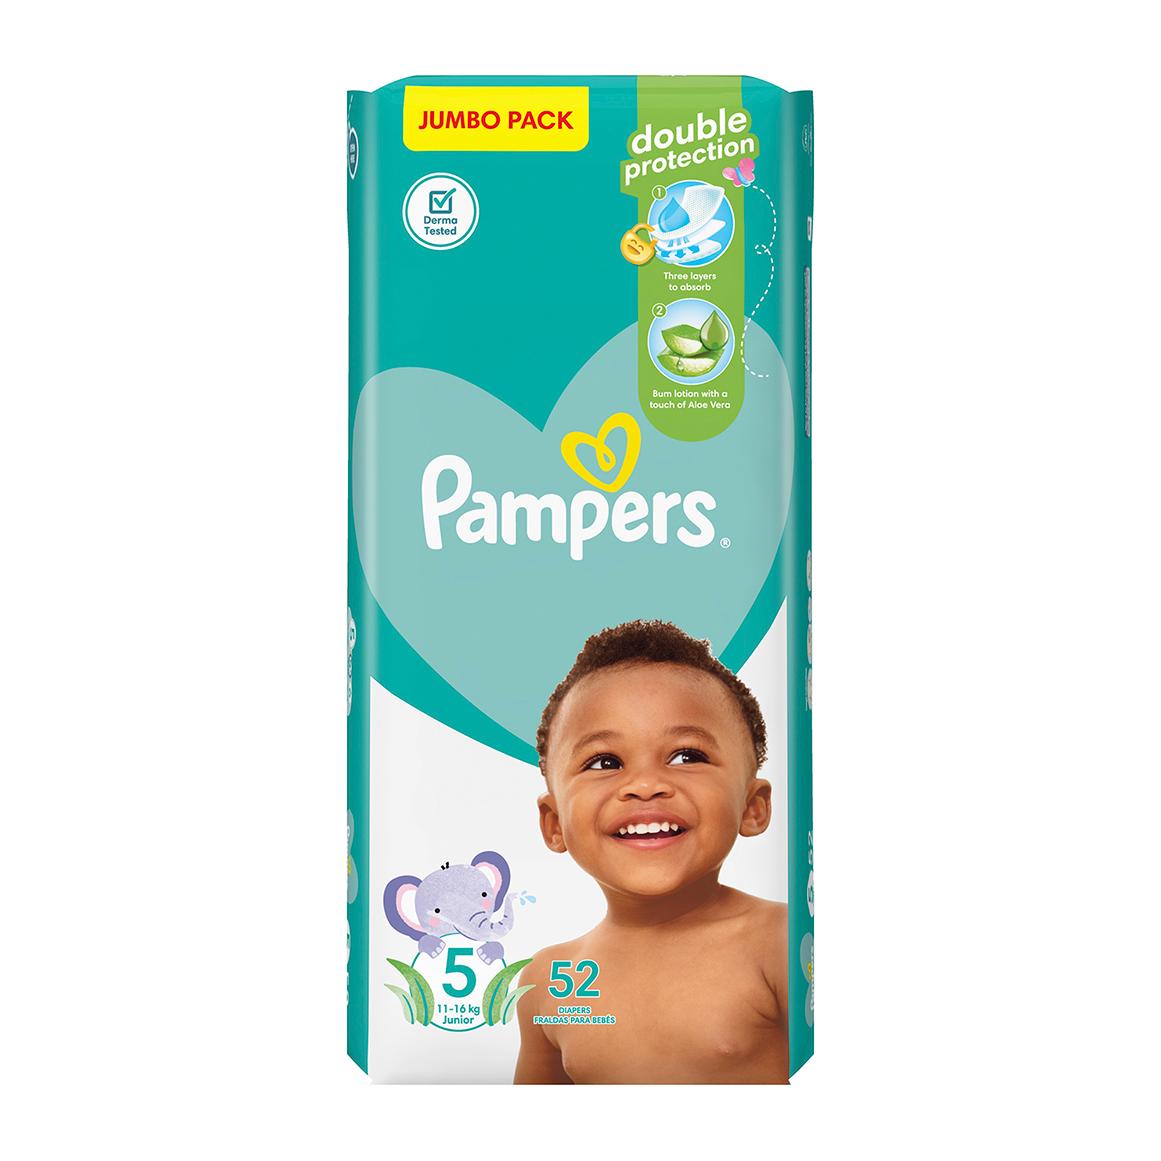 Pampers® Baby-Dry™ Nappy Pants